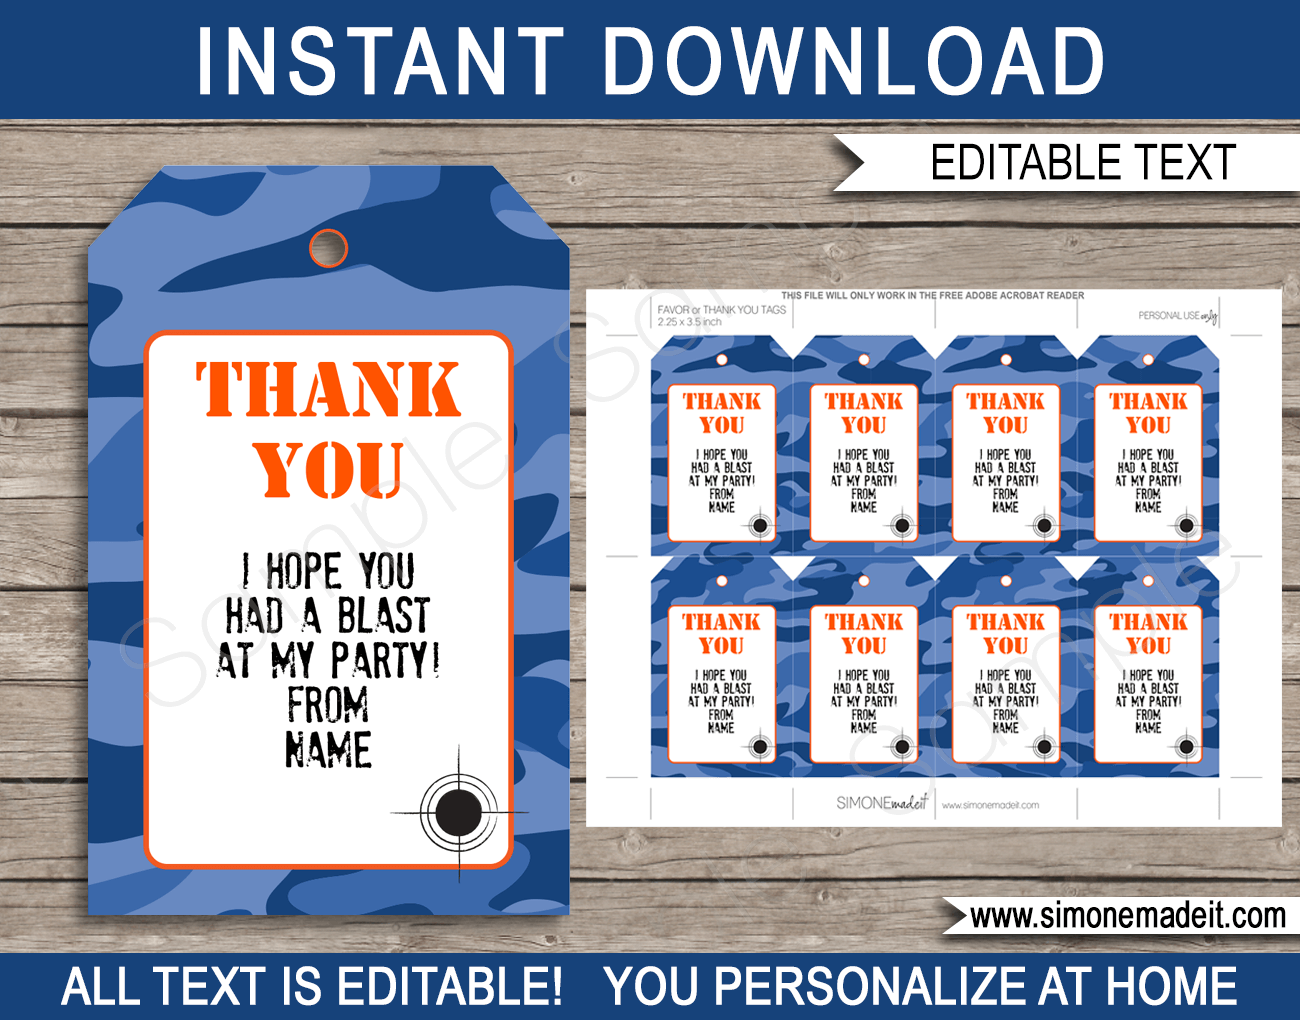 Nerf Birthday Party Favor Tags | Thank You Tags | Blue Camo | Editable & Printable DIY Template | $3.00 INSTANT DOWNLOAD via simonemadeit.com